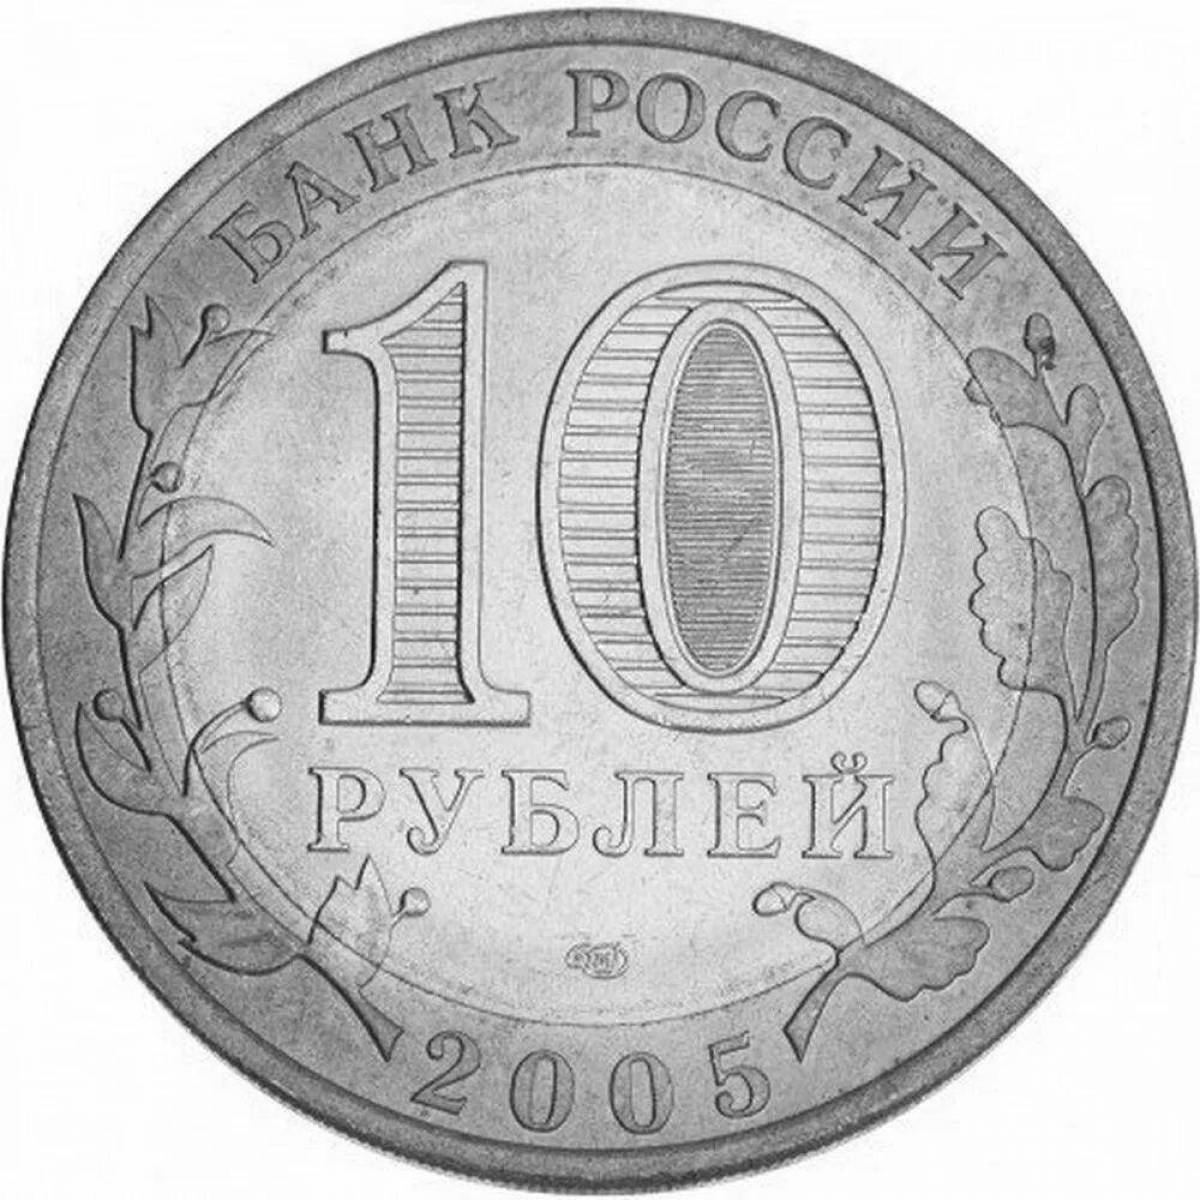 Coloring luminous coin 10 rubles